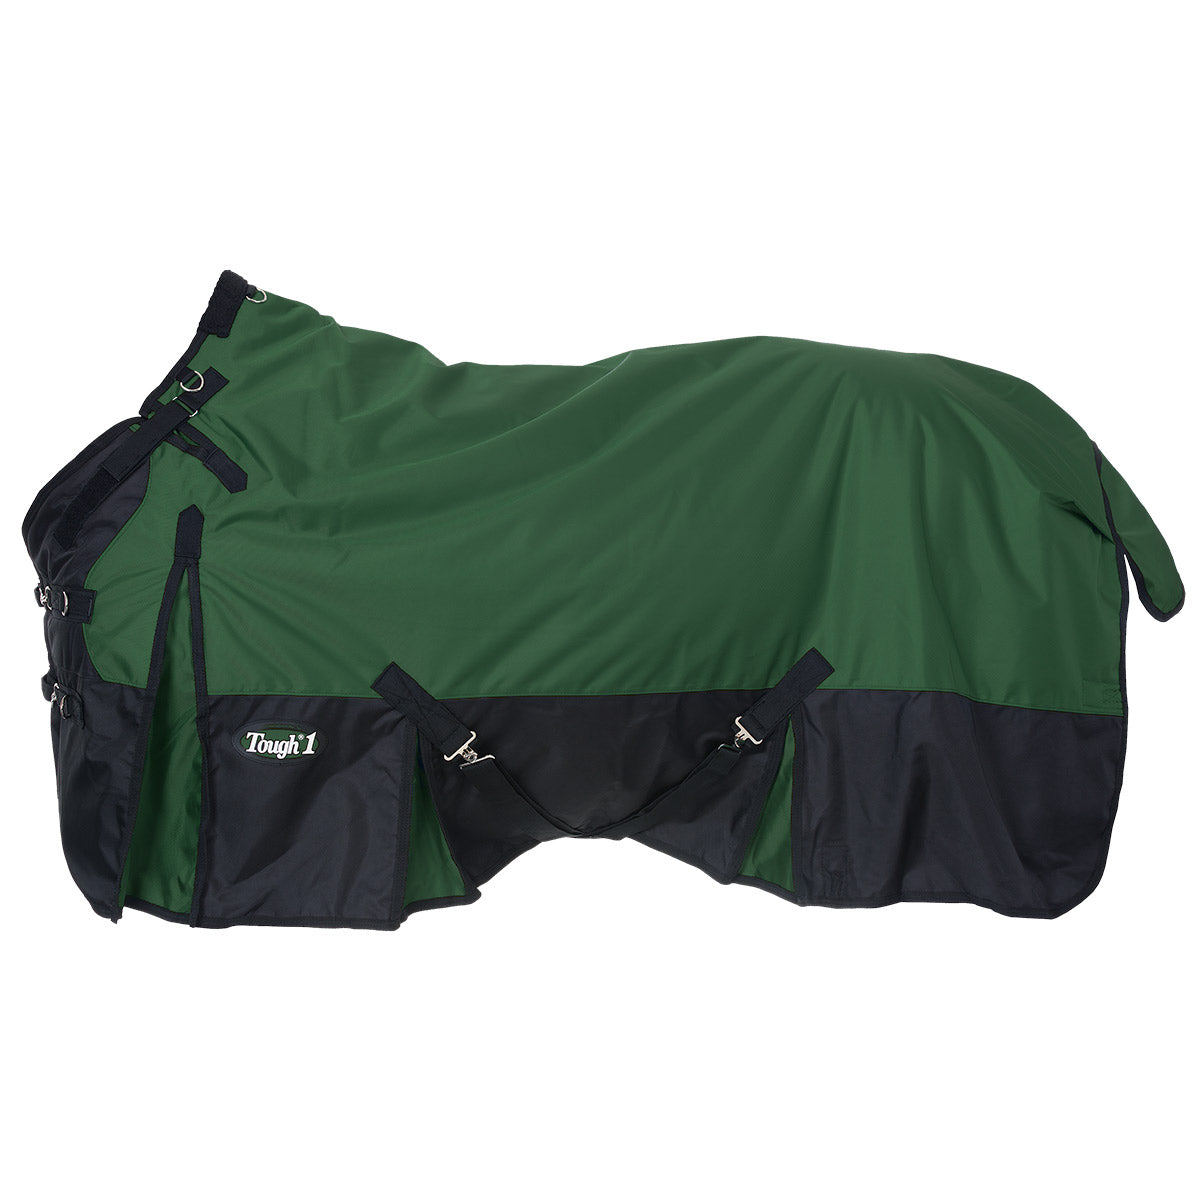 Hunter Green Tought1 1680D Turnout Blanket with Snuggit